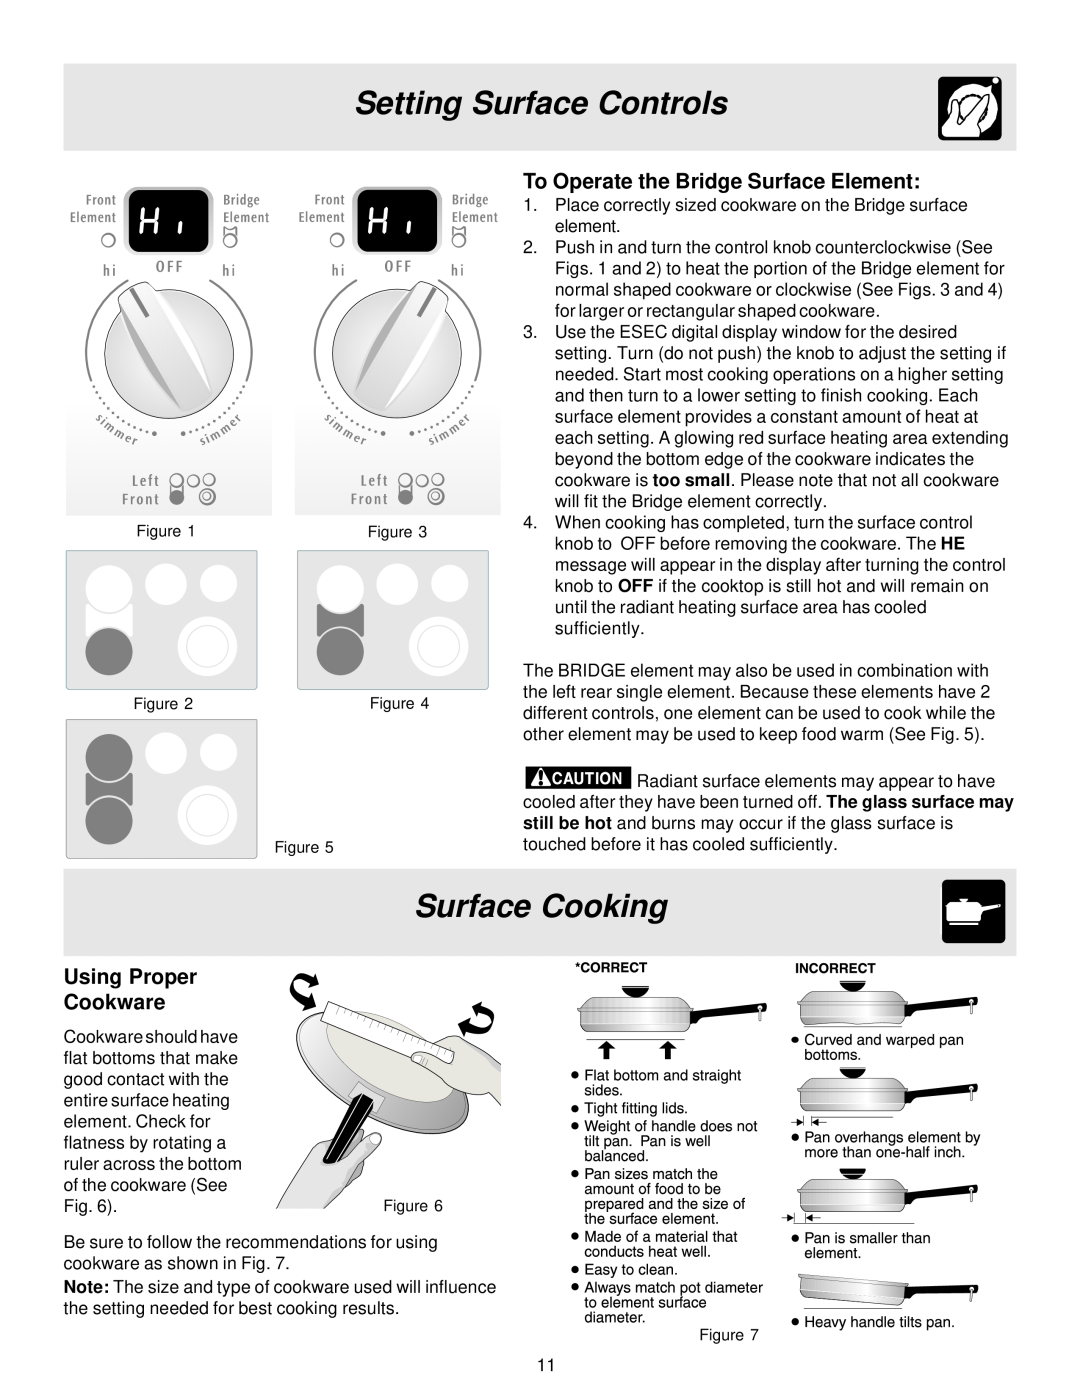 Frigidaire 316257124, ES40 manual Surface Cooking, To Operate the Bridge Surface Element, Using Proper Cookware 